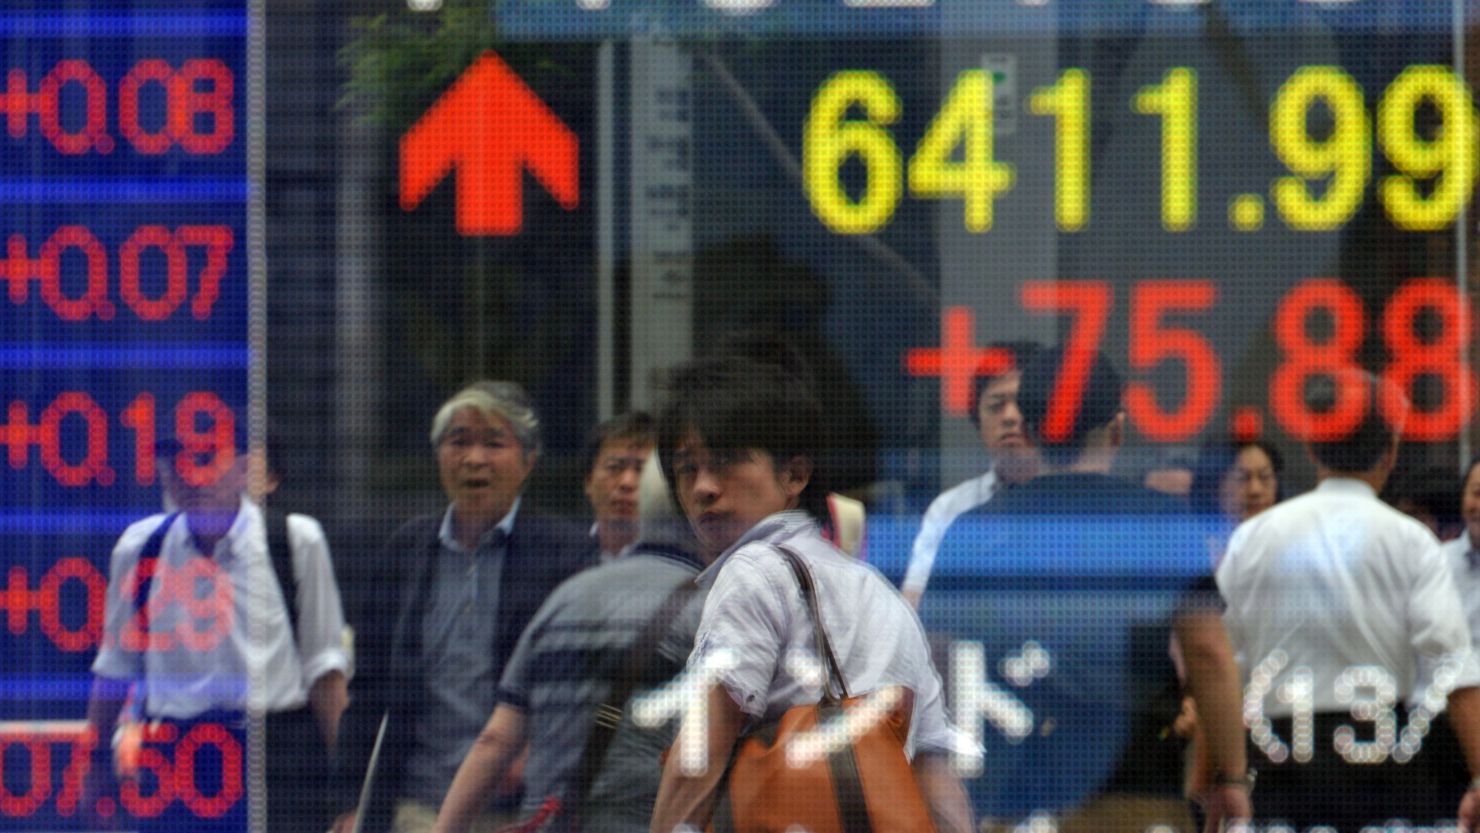 Japan's Nikkei 225 Stock Average rallied 2.9%, and South Korea's Kospi also gained.